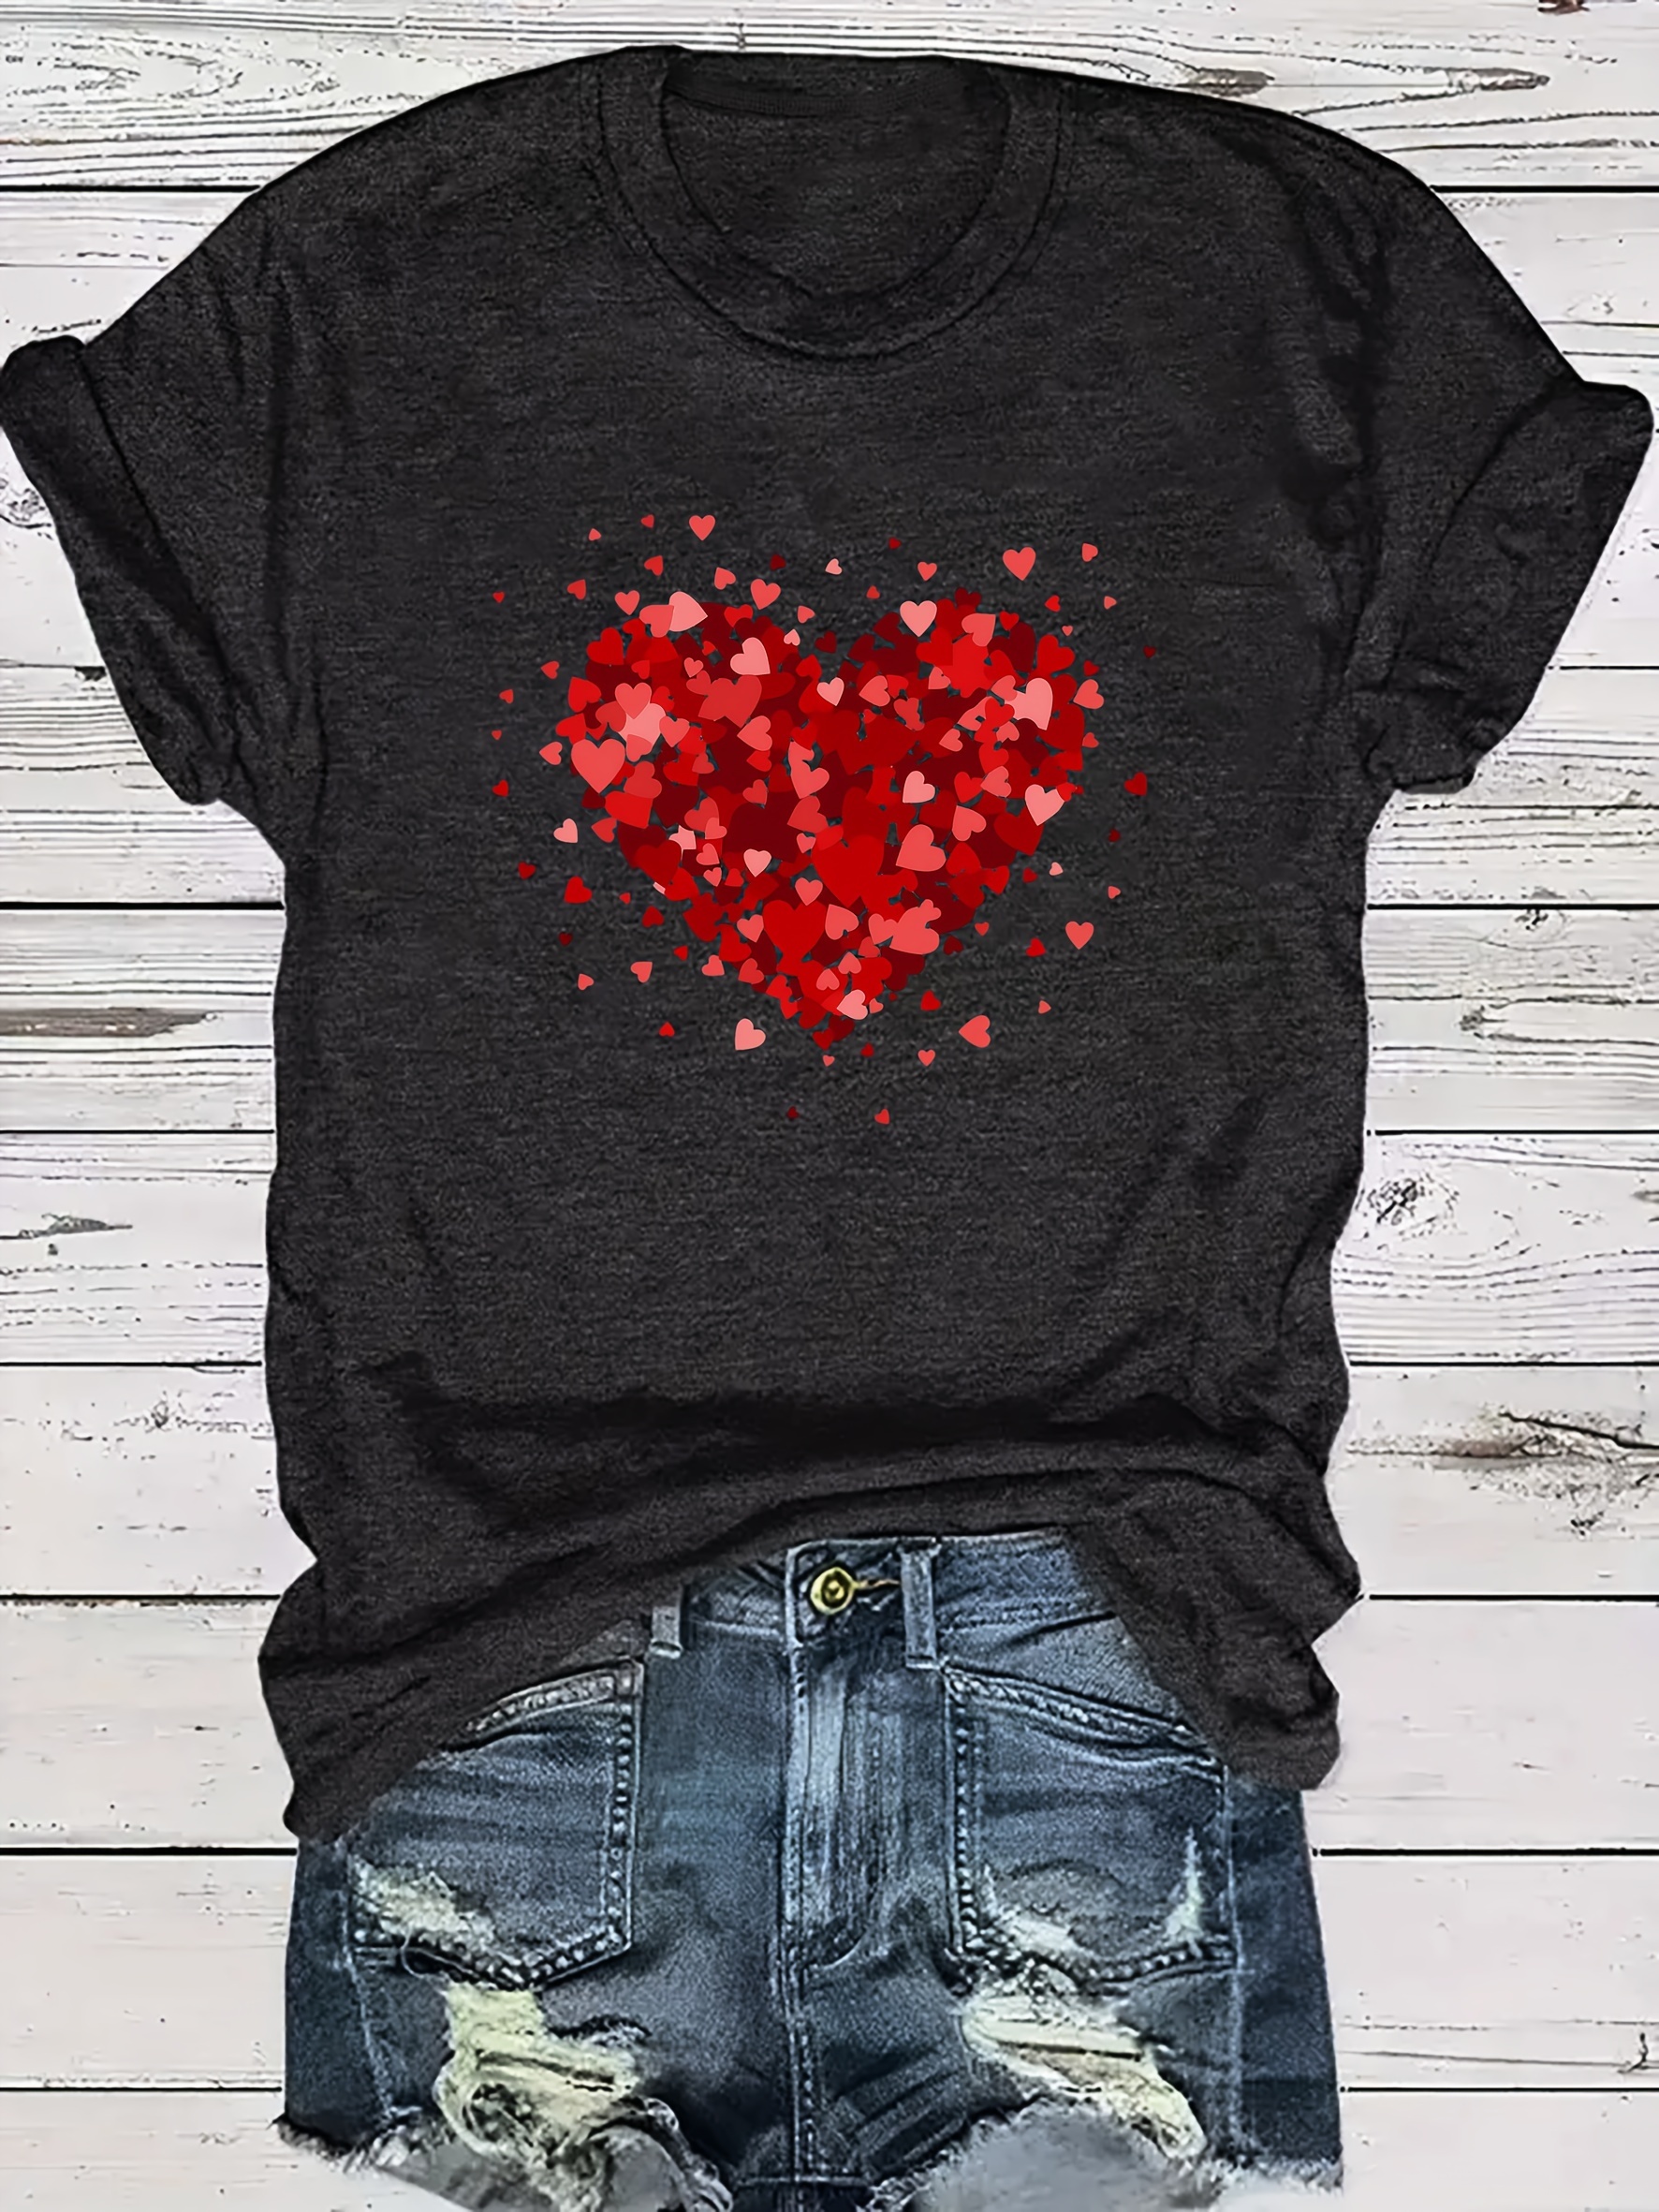 zanvin Womens Valentine's Day Graphic Tees Short Sleeve Love Heart Tshirts  Cute Valentine Gift for Her,Navy,S